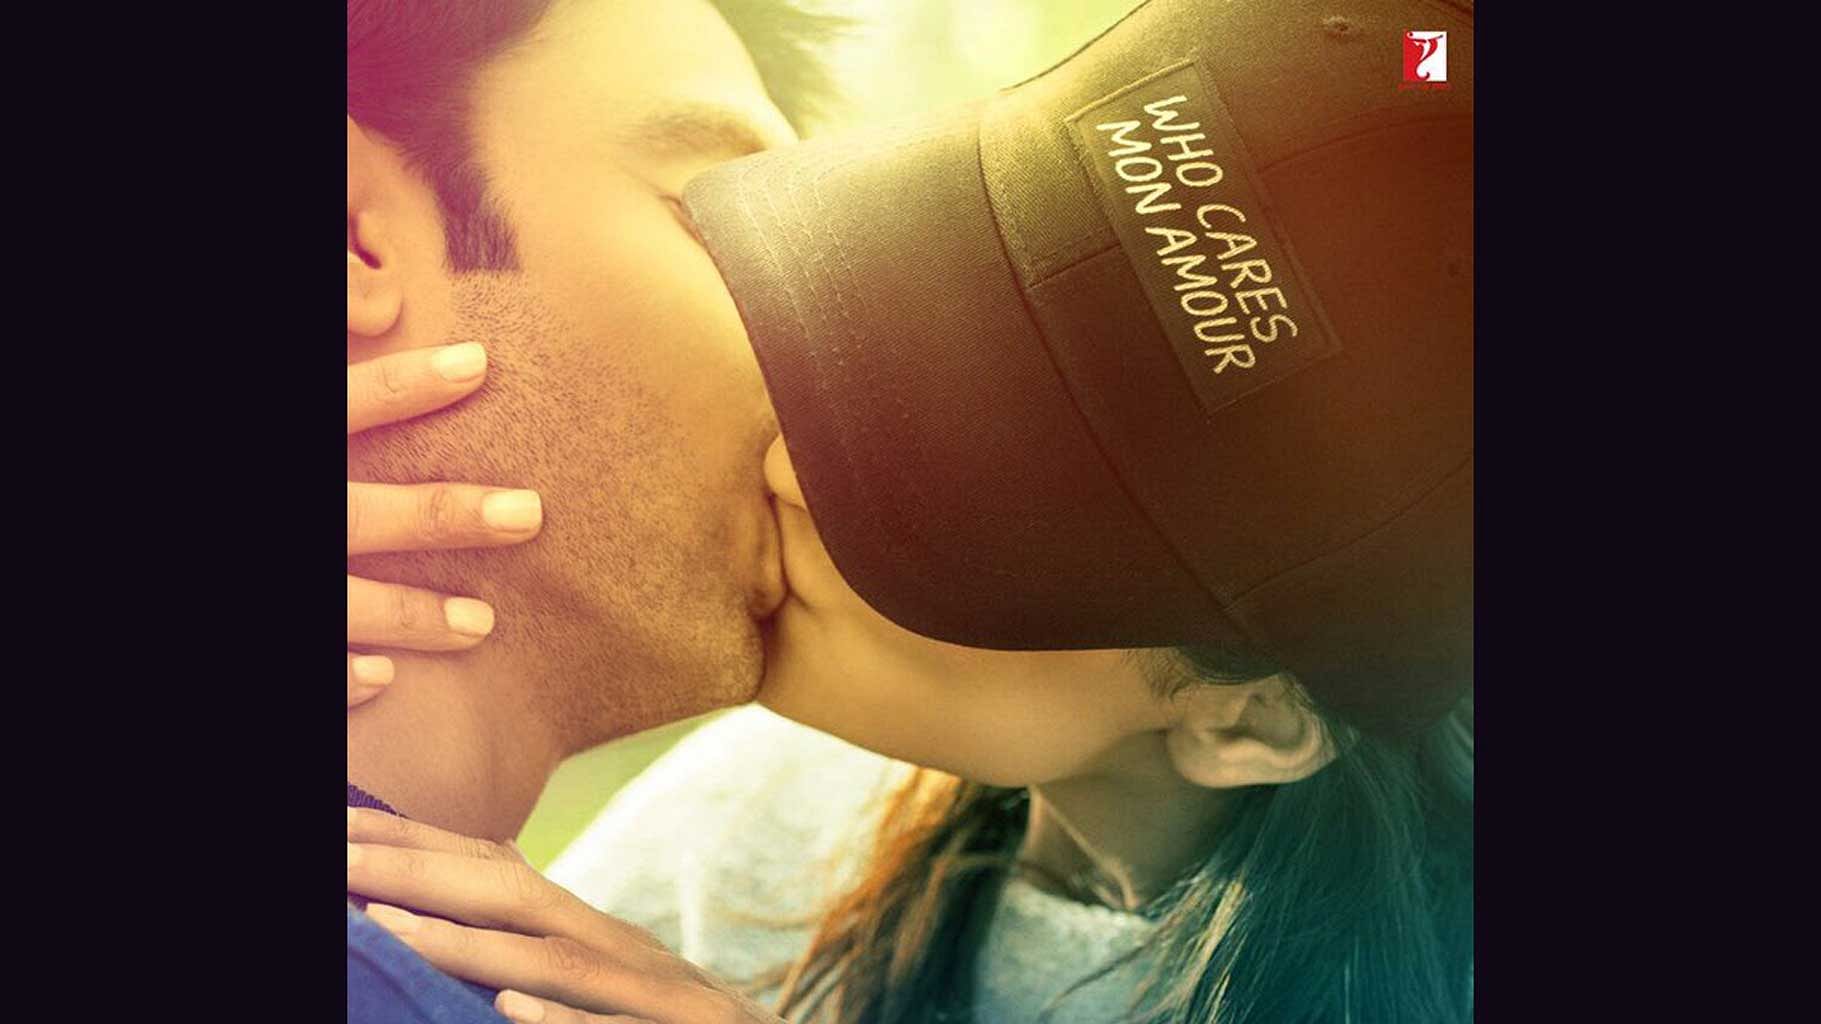 bollywoodpataka.com - IS #Bollywood becoming #BEFIKRE W KISSES in 2016??  Watch Video with Hottest #Kisses in #Bollywood https://youtu.be/mBE3EvtYS9M  #Bollywoodpataka | Facebook